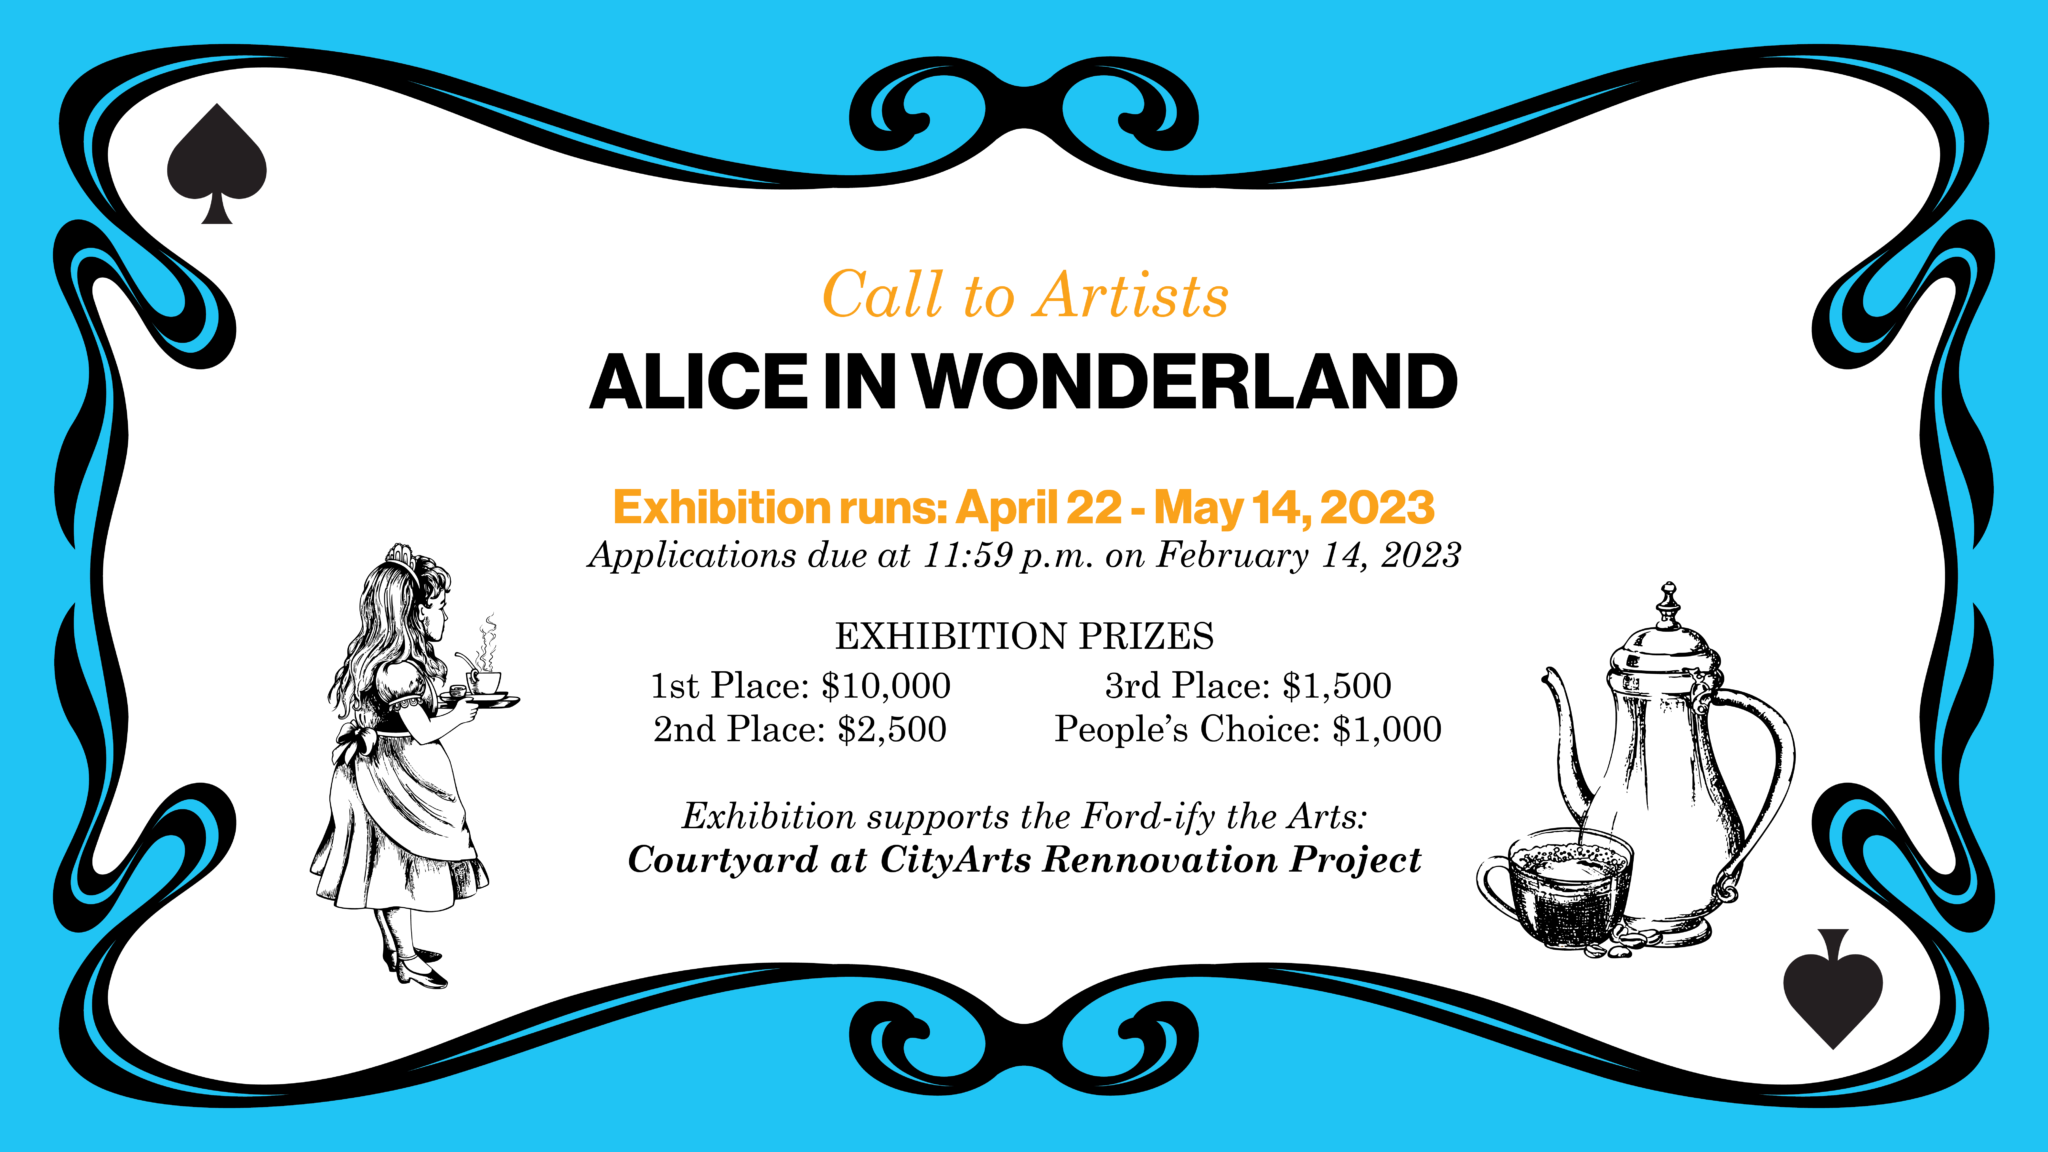 Call to Artists Alice in Wonderland V4